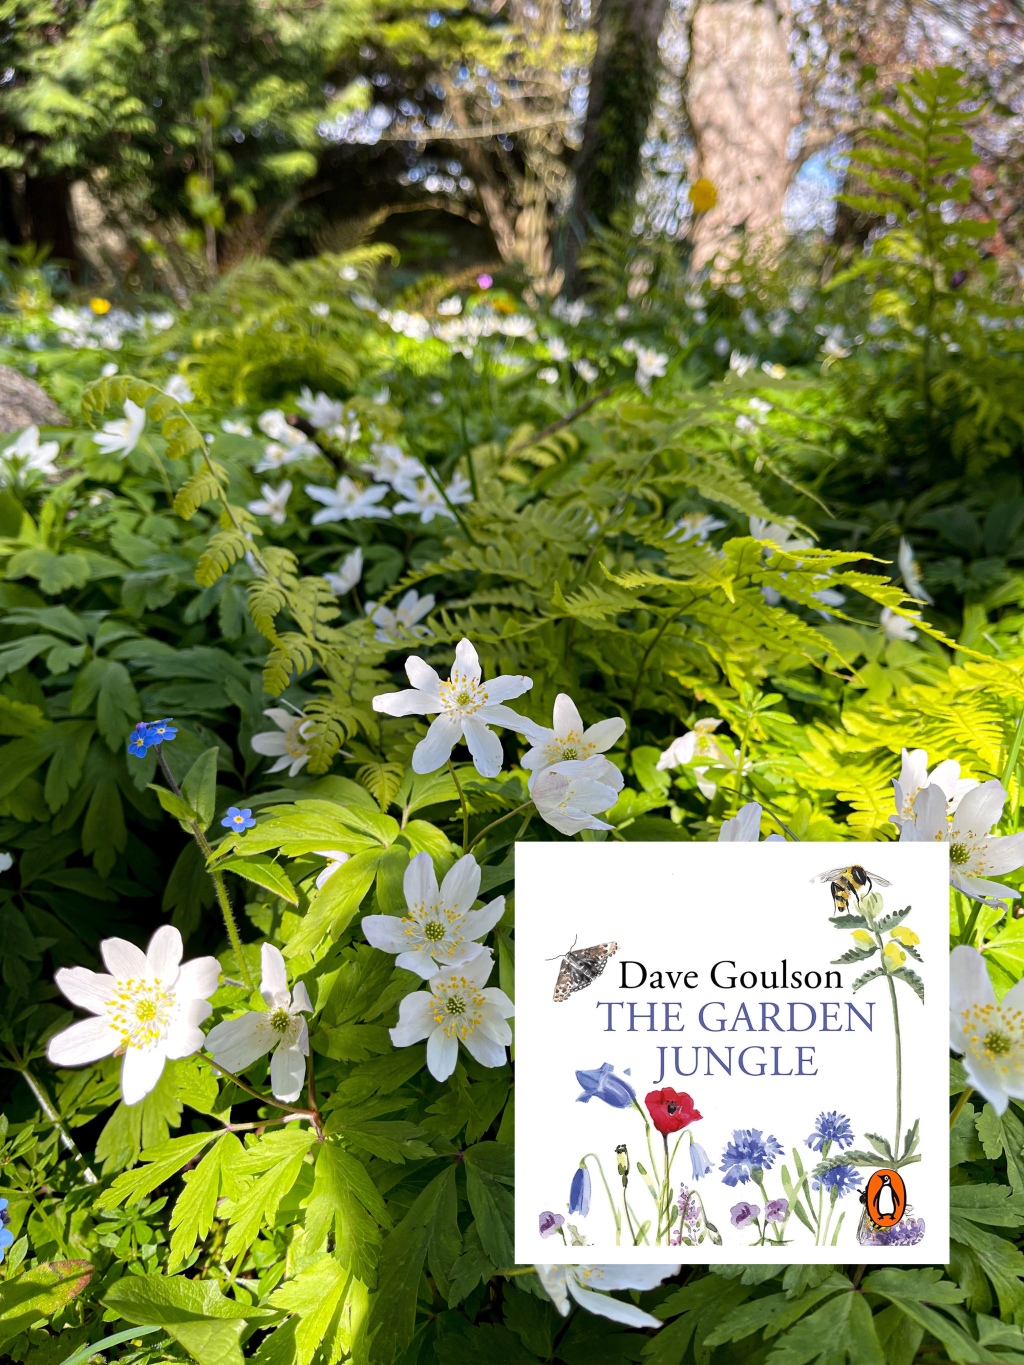 The Garden Jungle by Dave Goulson – Book Recommendation